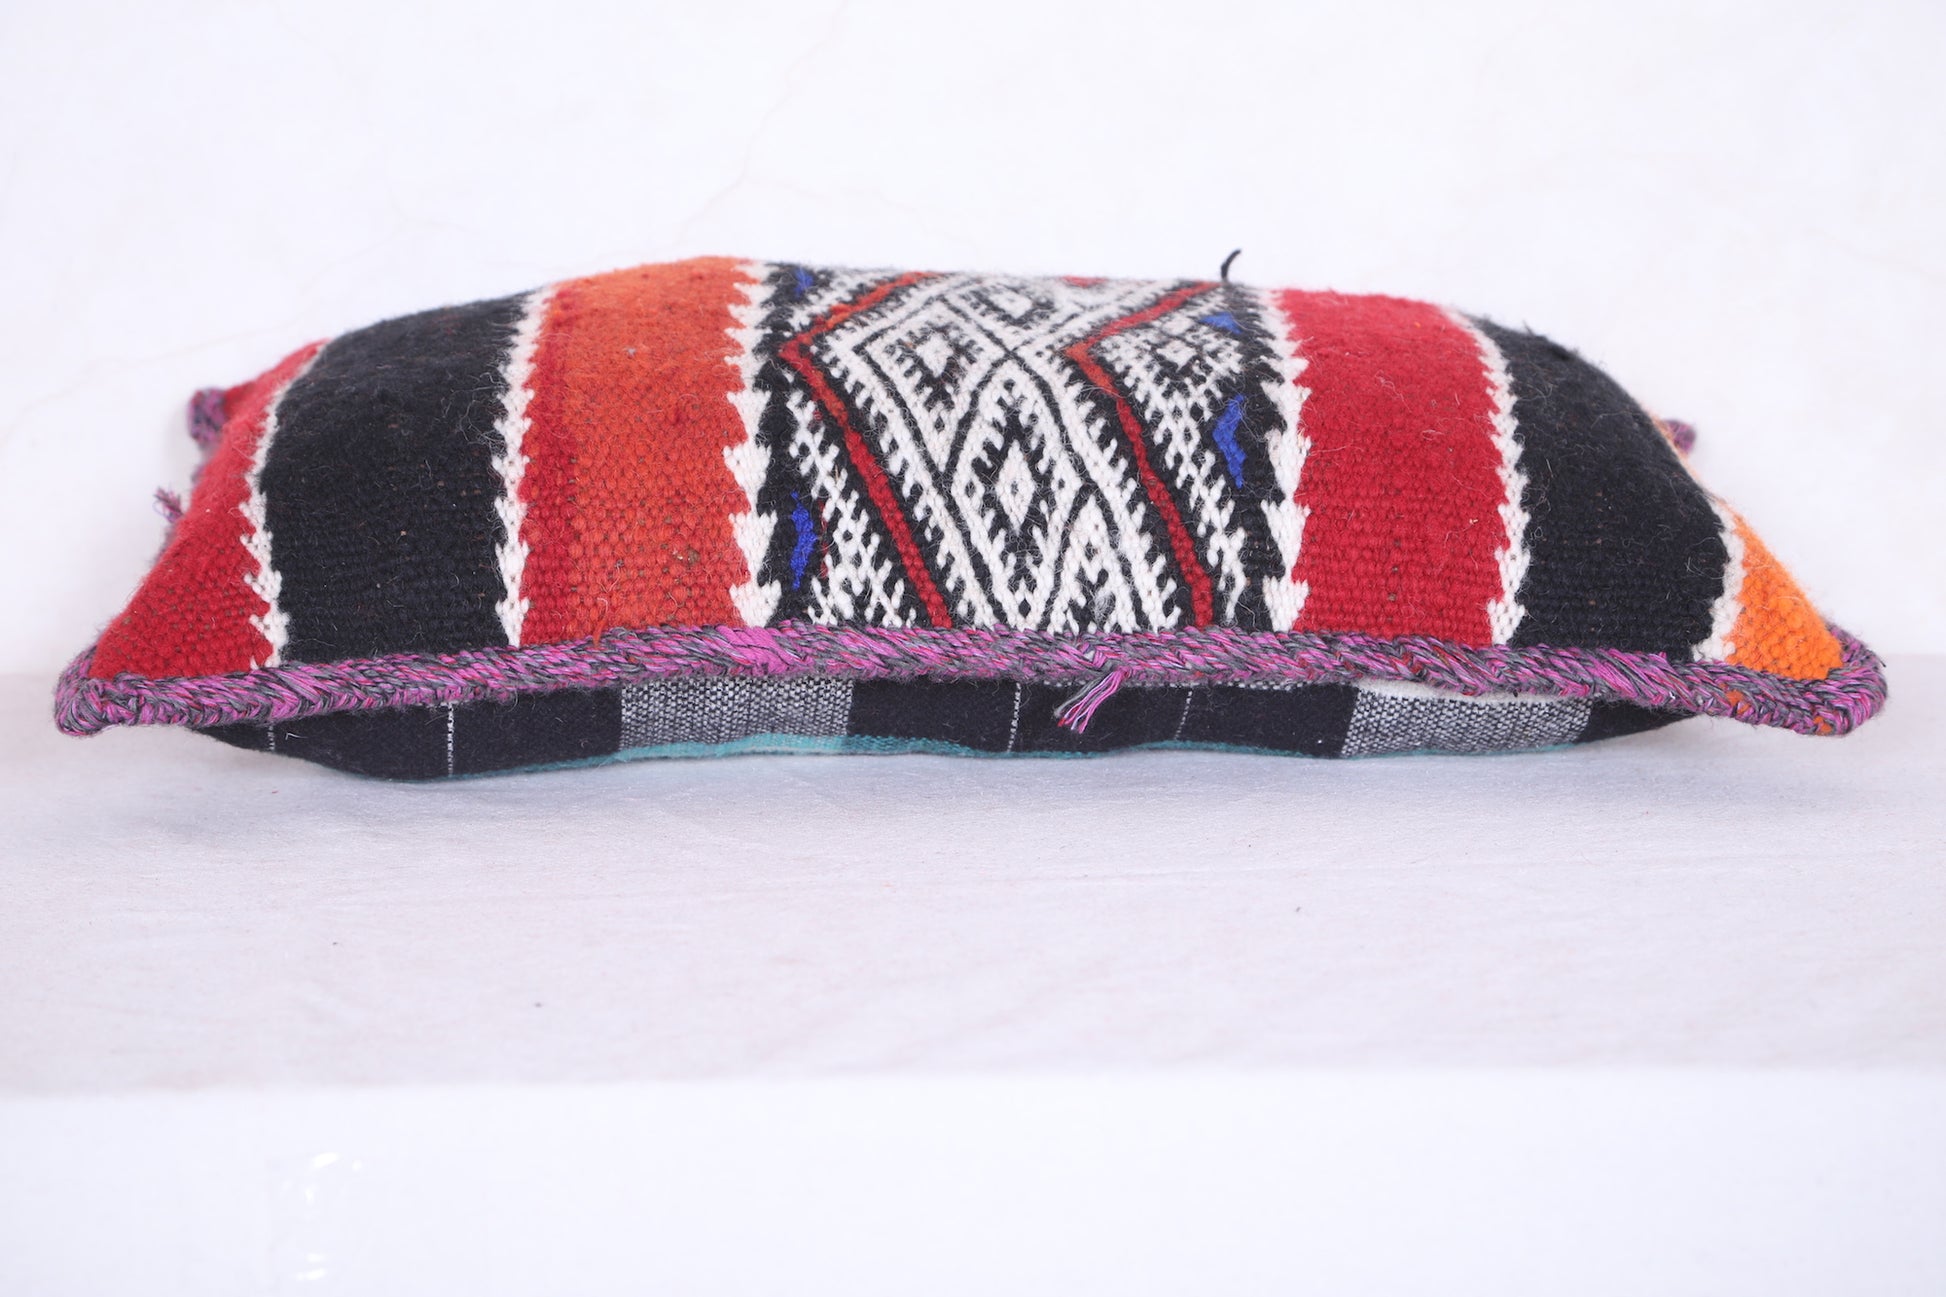 Moroccan handmade kilim pillow 14.1 INCHES X 23.2 INCHES